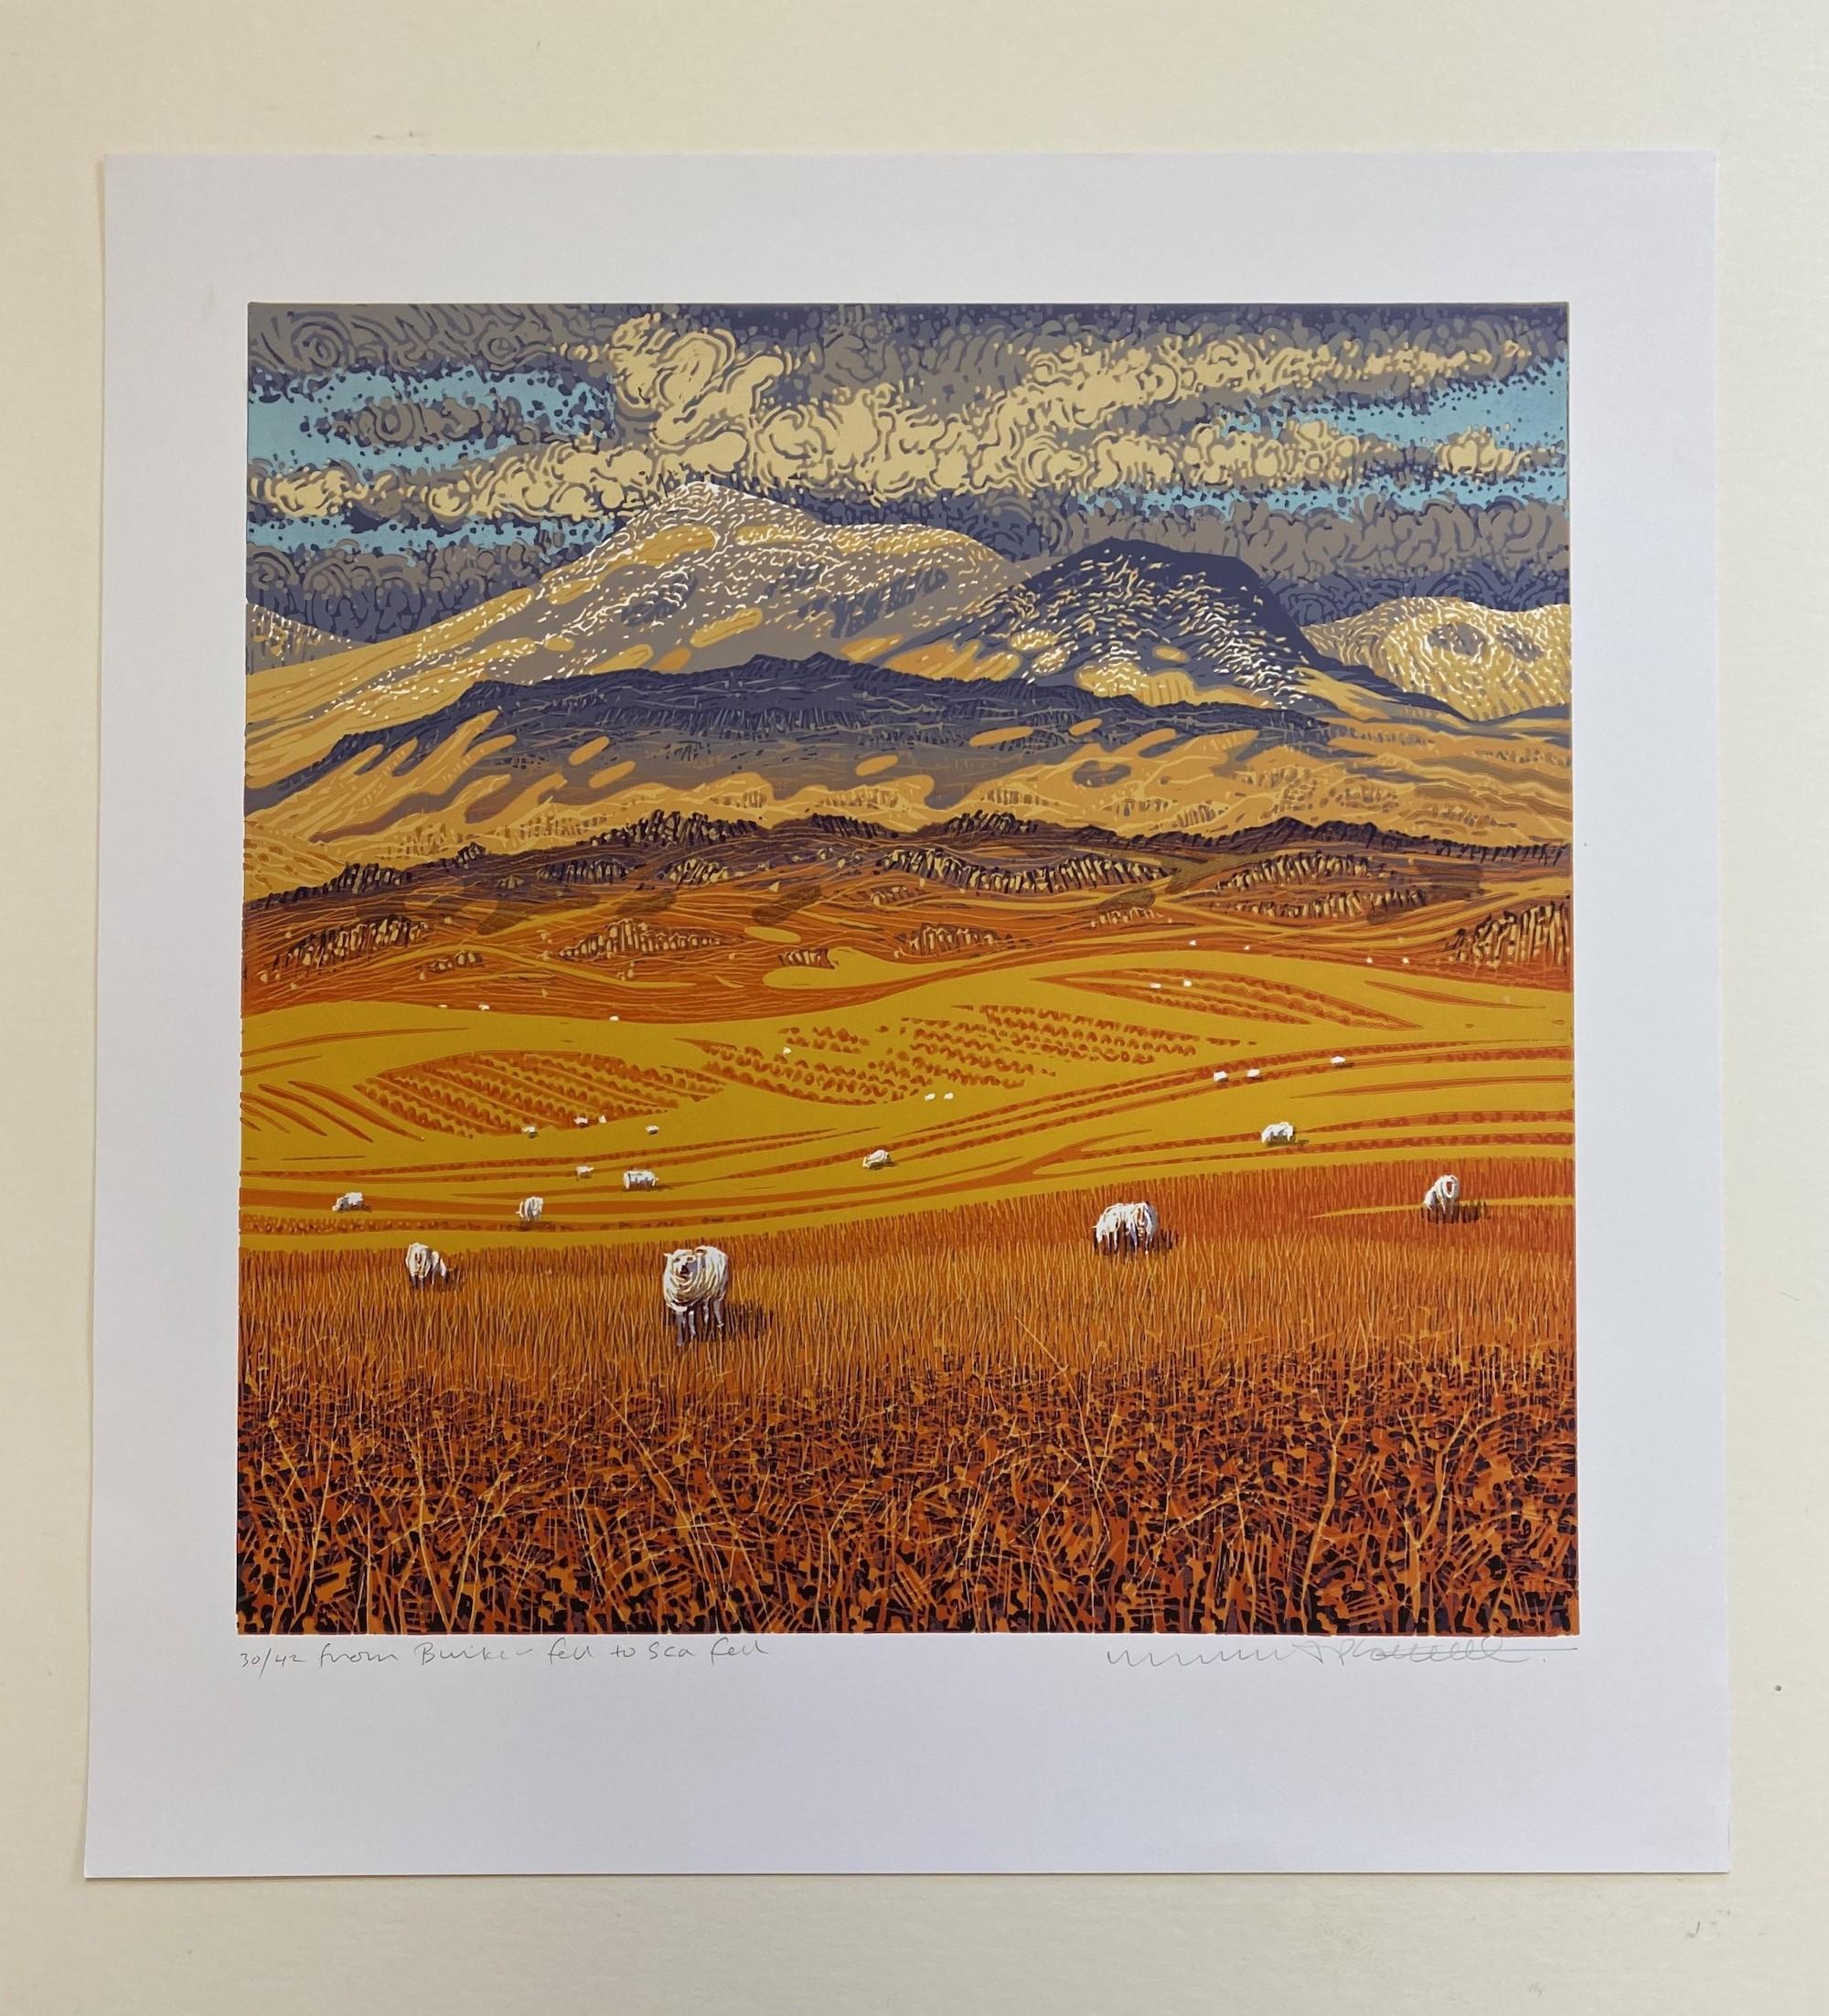 From Birker Fell to Sca Fell, Mark A Pearce, Linocut print, bright artwork For Sale 1